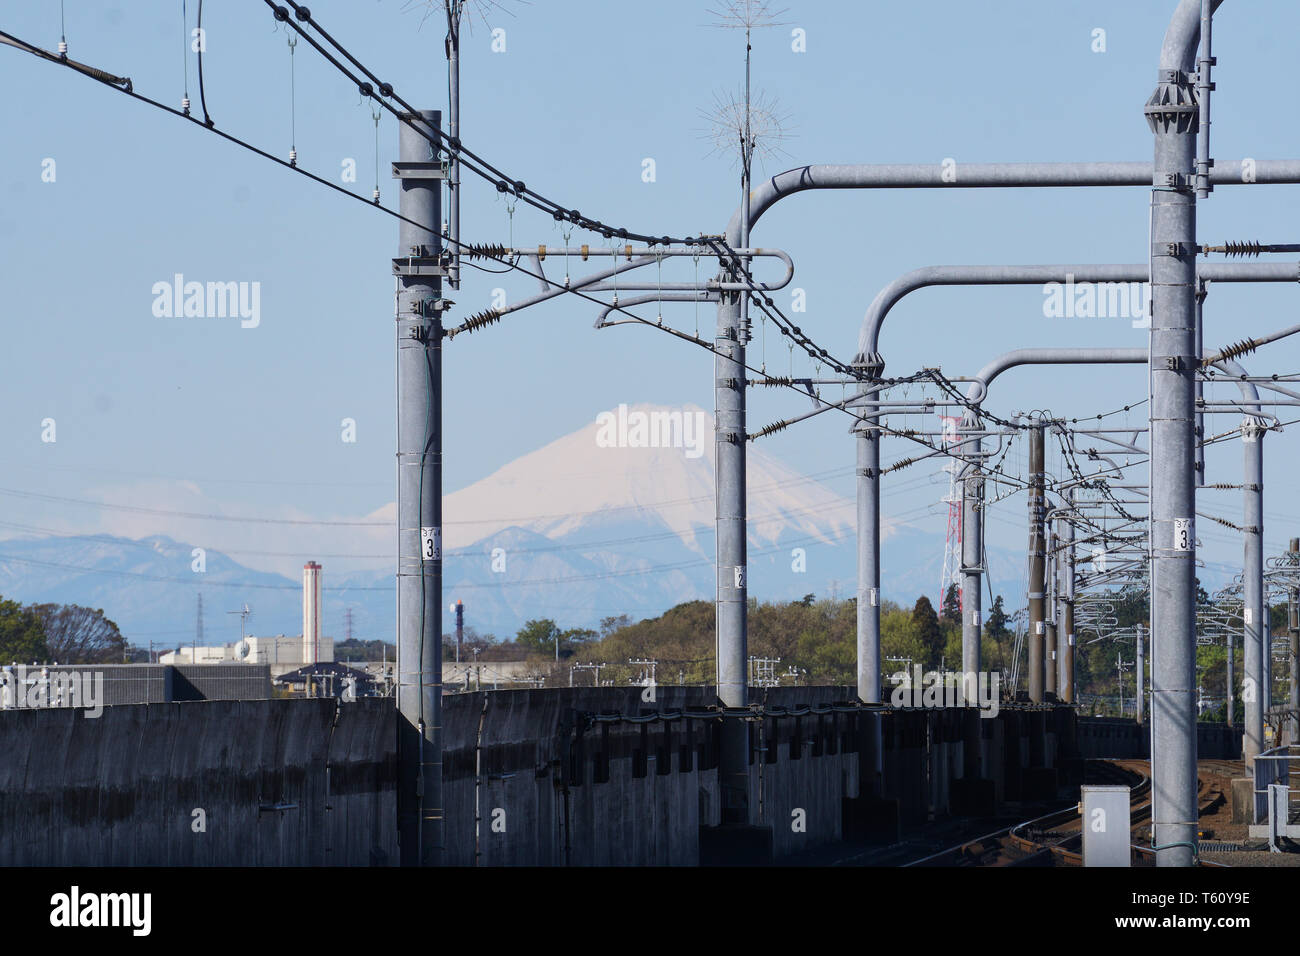 Mount Fuji appears in the distance between power lines and structures built along the tracks on the Tsukuba Express Line from Moriya Station, Ibaraki. Stock Photo